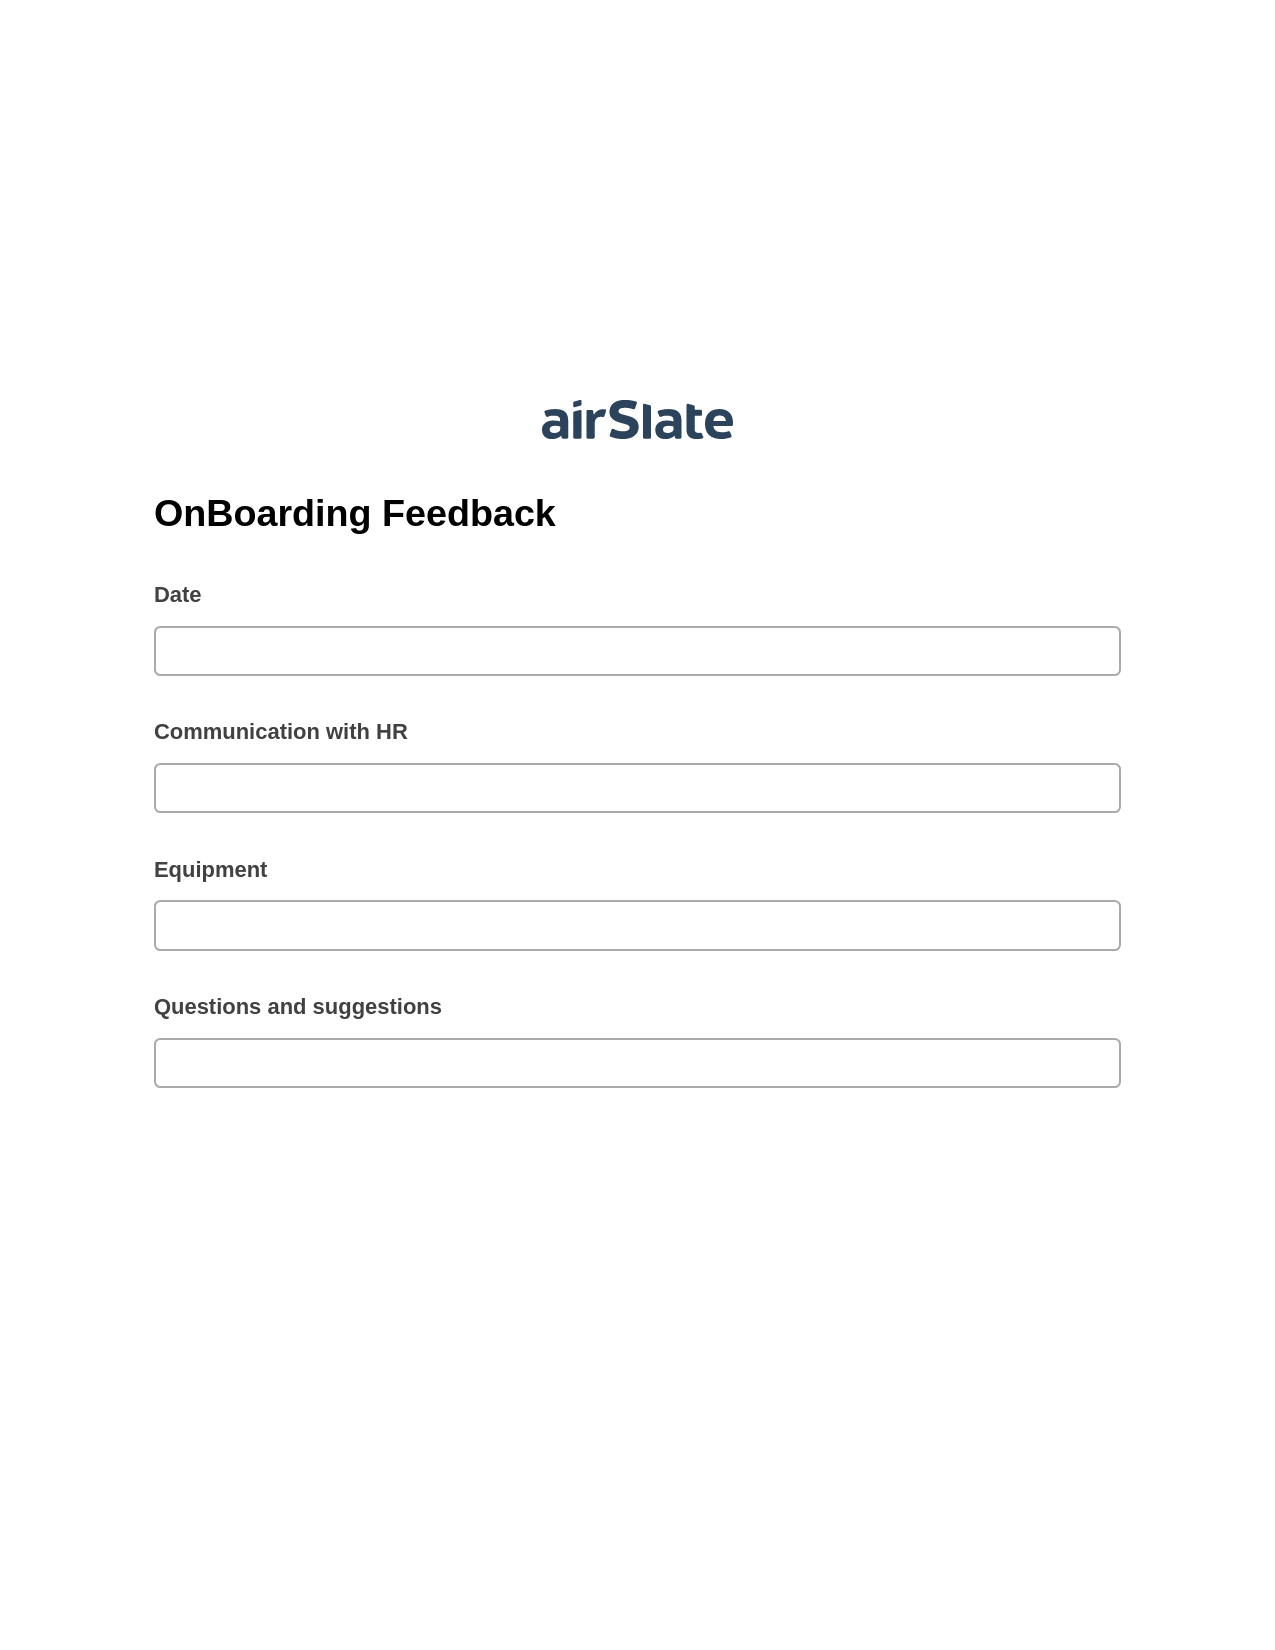 Multirole OnBoarding Feedback Pre-fill Slate from MS Dynamics 365 Records Bot, Email Notification Bot, Dropbox Bot